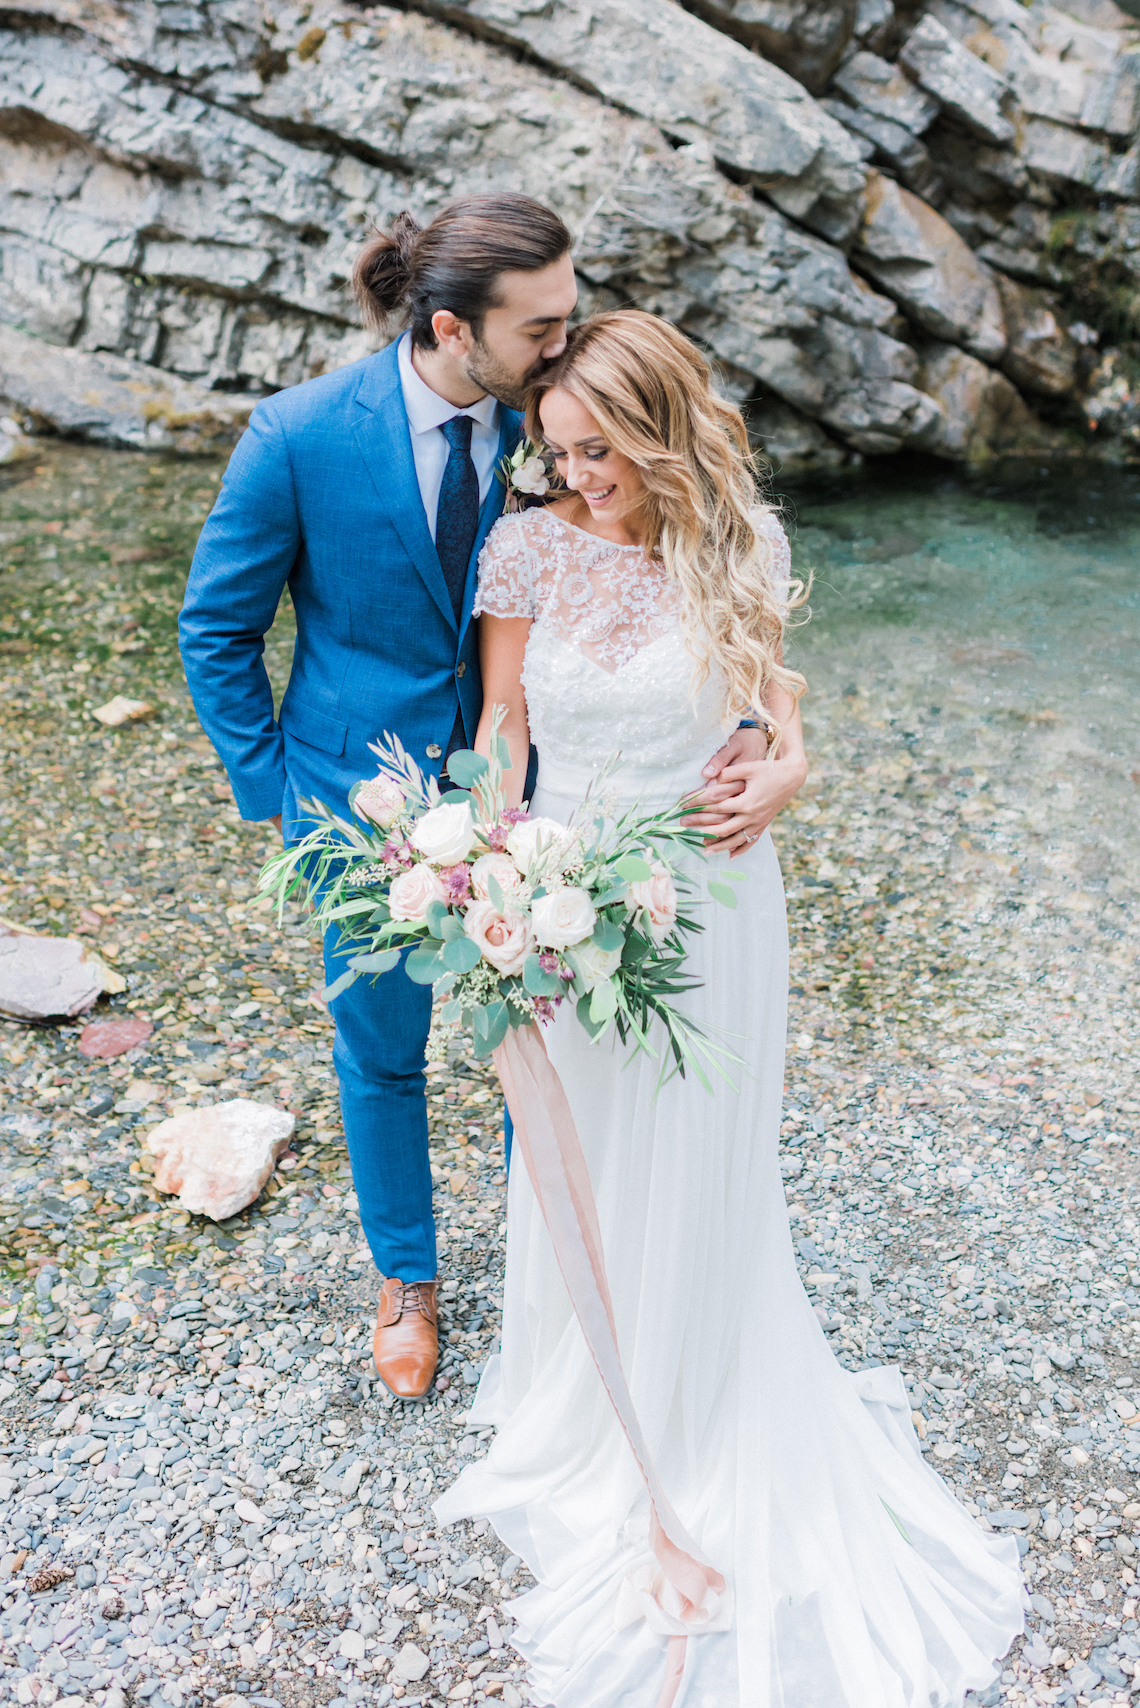 Waterfalls & Watercolors; Dreamy Blue Wedding Ideas | Minted Photography 2